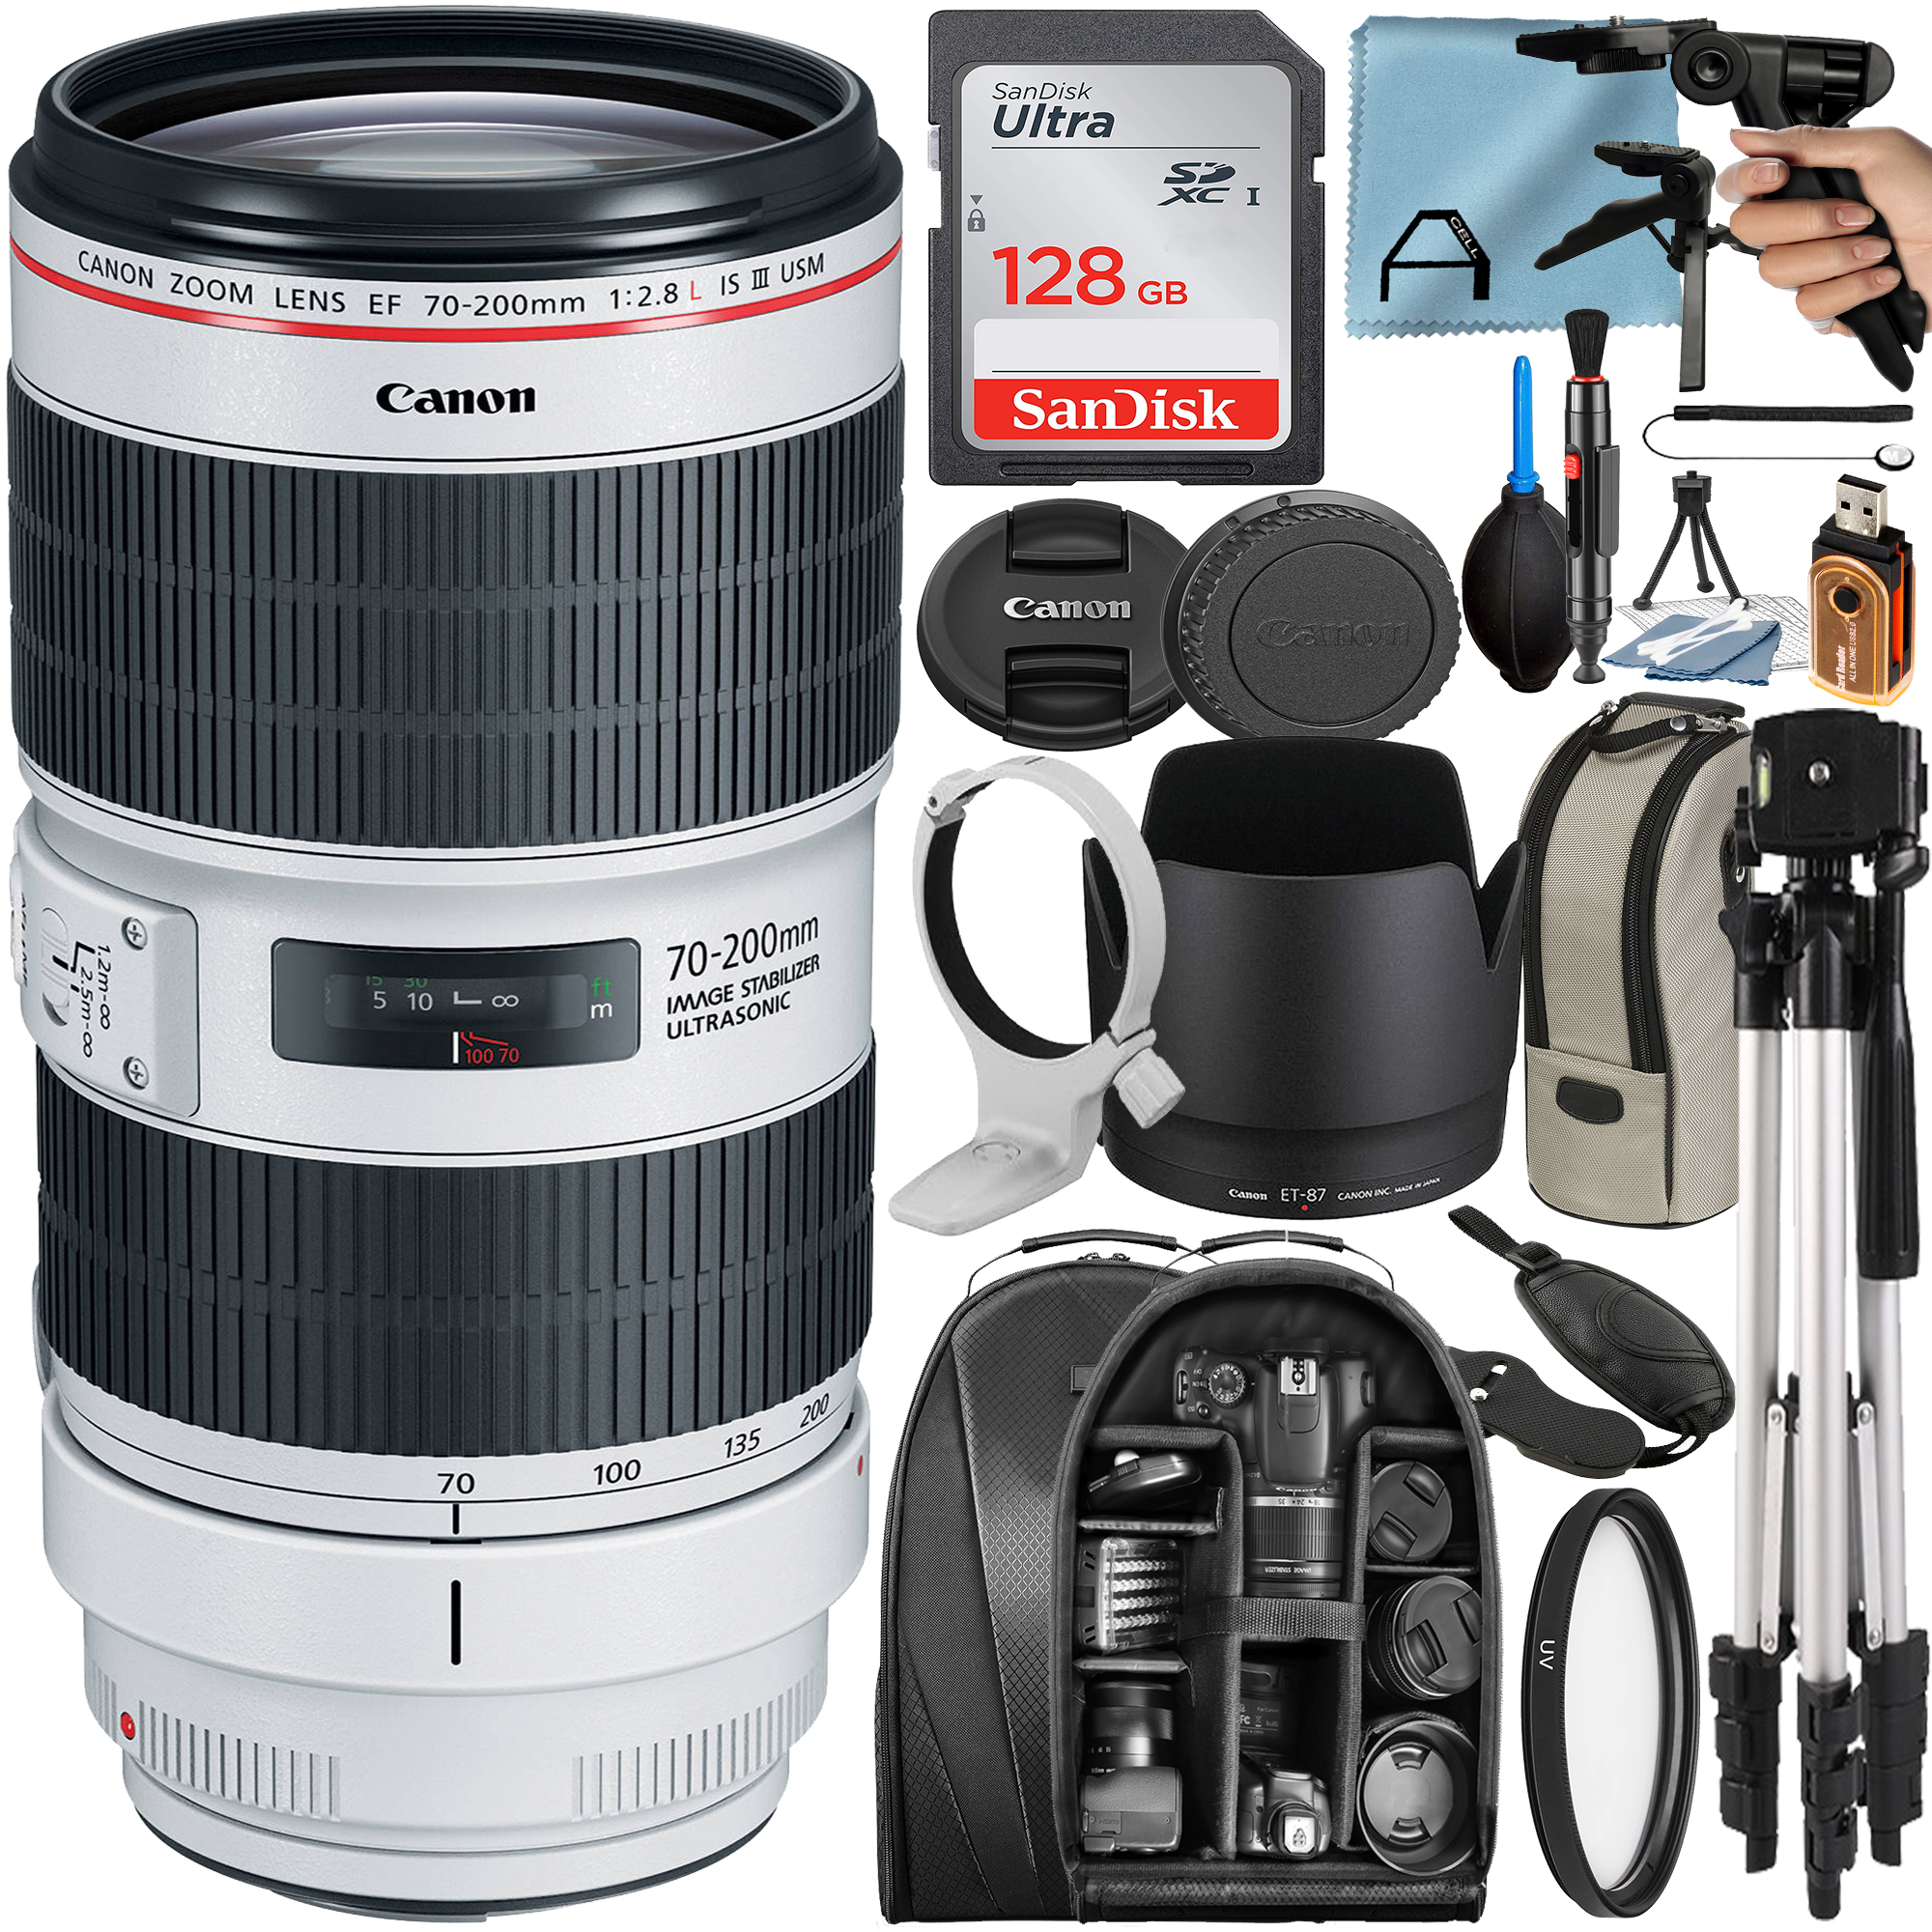 Canon EF 70-200mm f/2.8L IS III USM Lens with 128GB SanDisk Memory Card + Tripod + Backpack + A-Cell Accessory Bundle